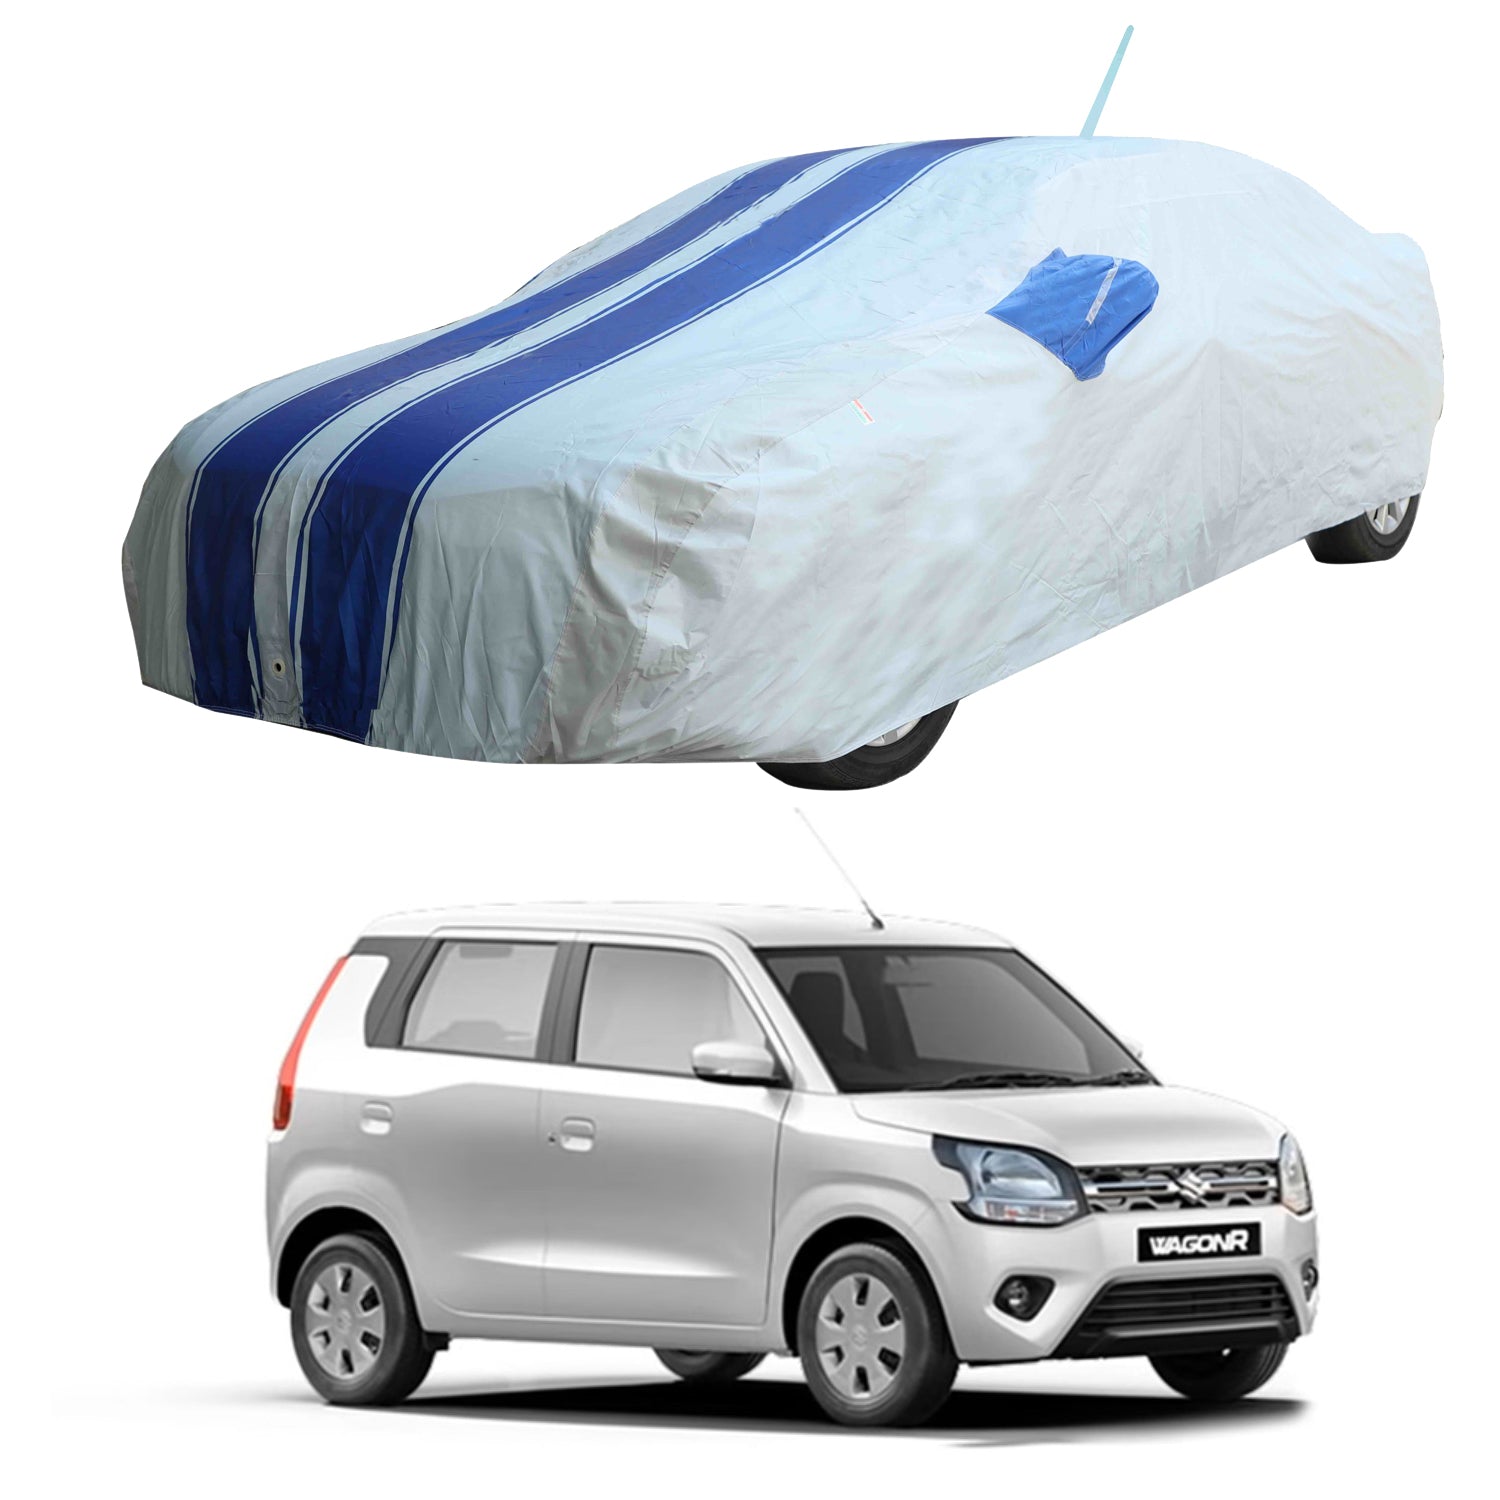 Oshotto 100% Blue dustproof and Water Resistant Car Body Cover